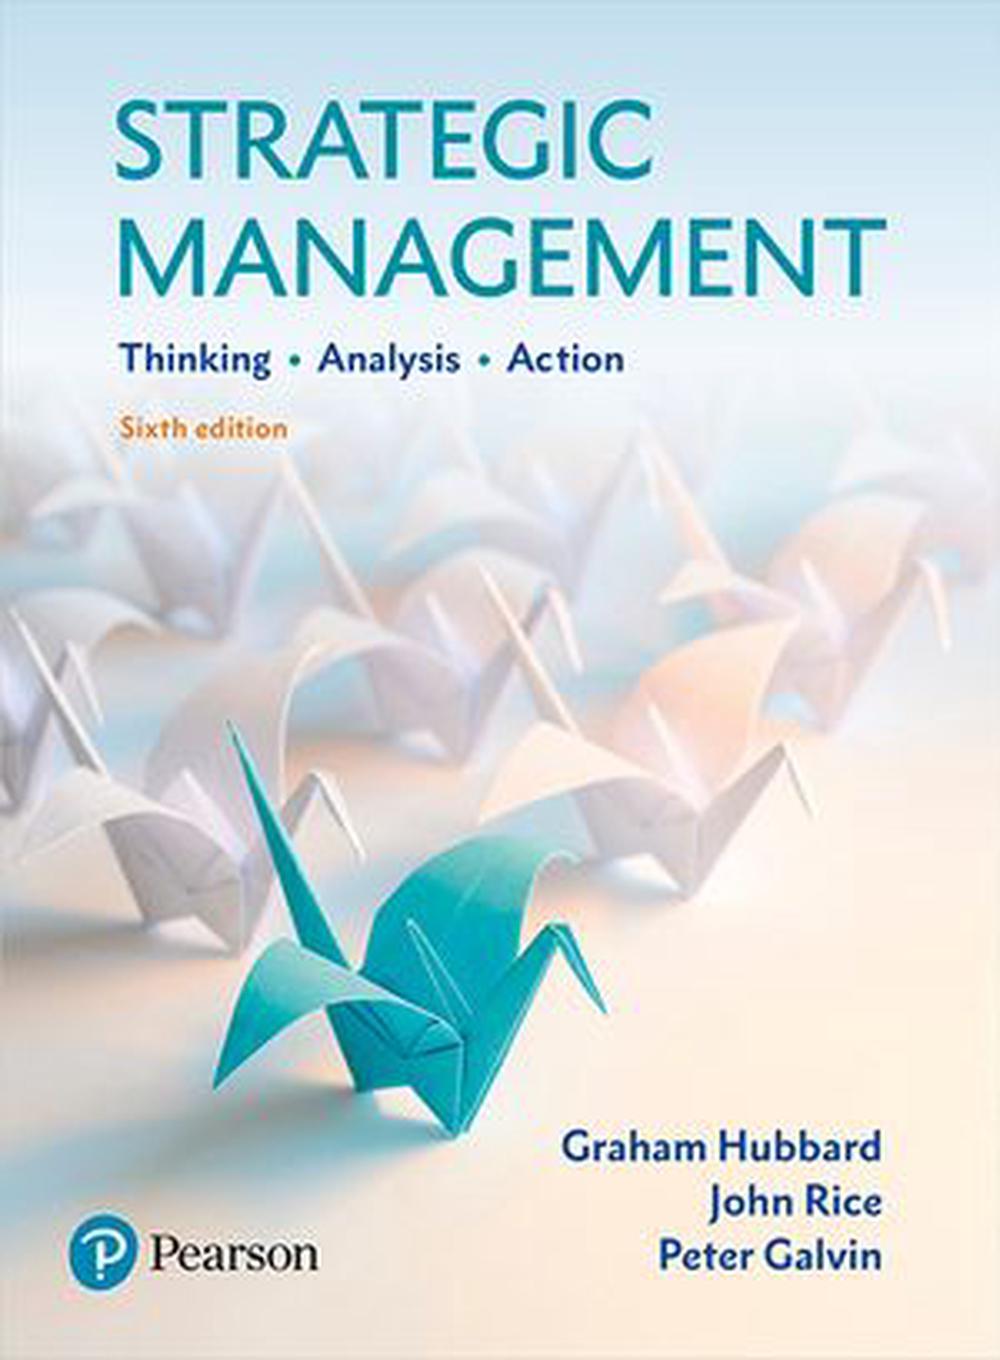 Strategic Management, 6th Edition by Graham Hubbard, Paperback, 9781488617348 Buy online at